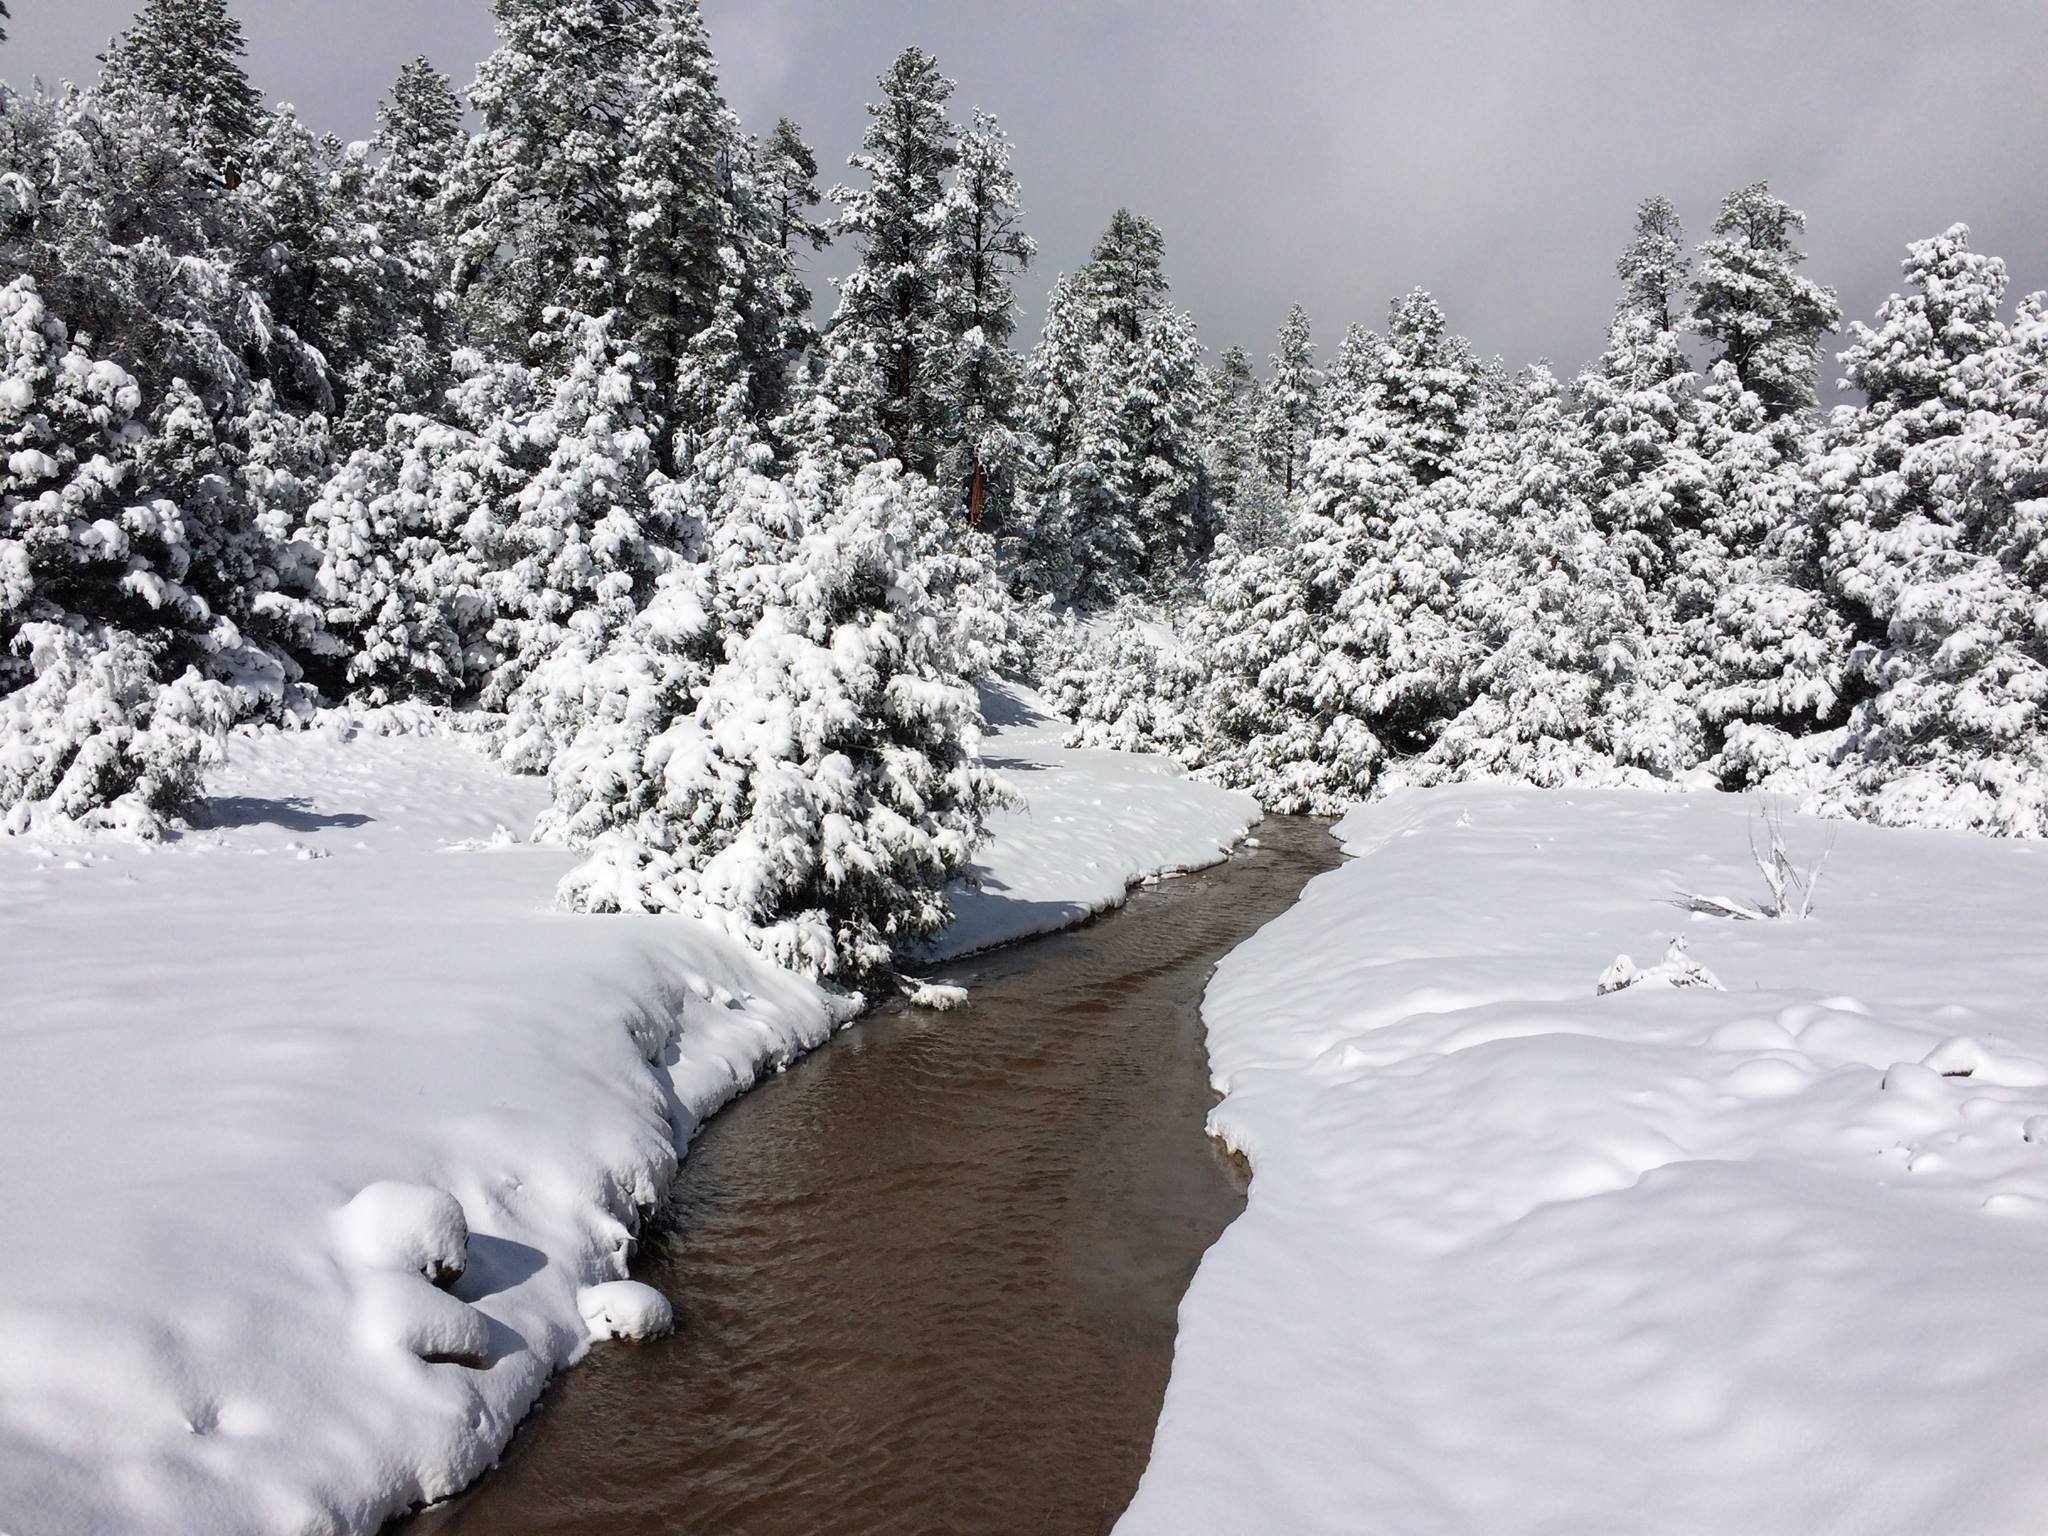 Water flows in the creek, but snow covers the ground and trees in the background.